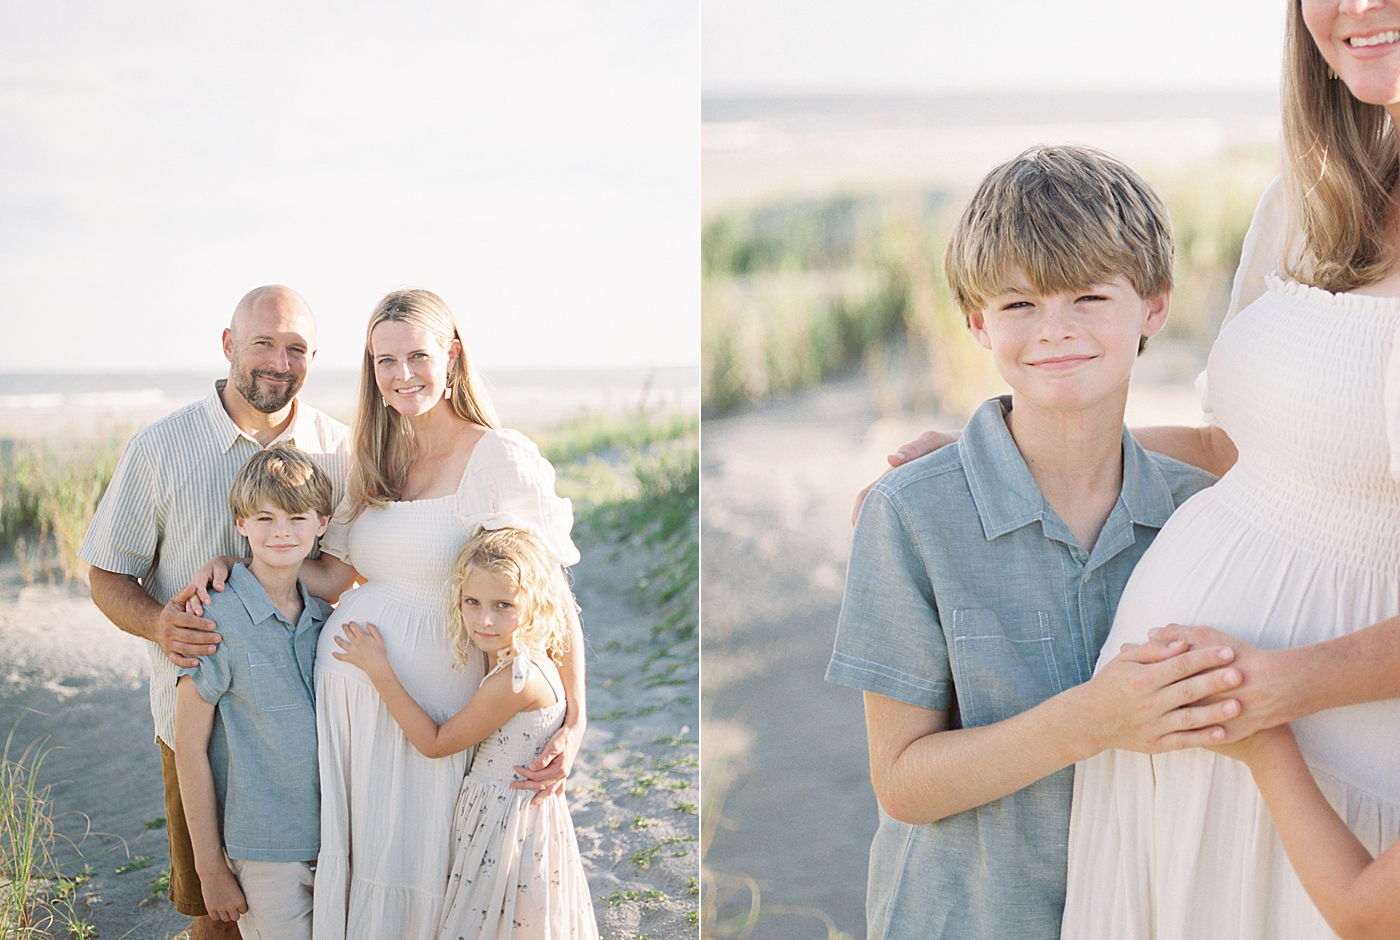 Family of four smiling on the beach | Image by Caitlyn Motycka